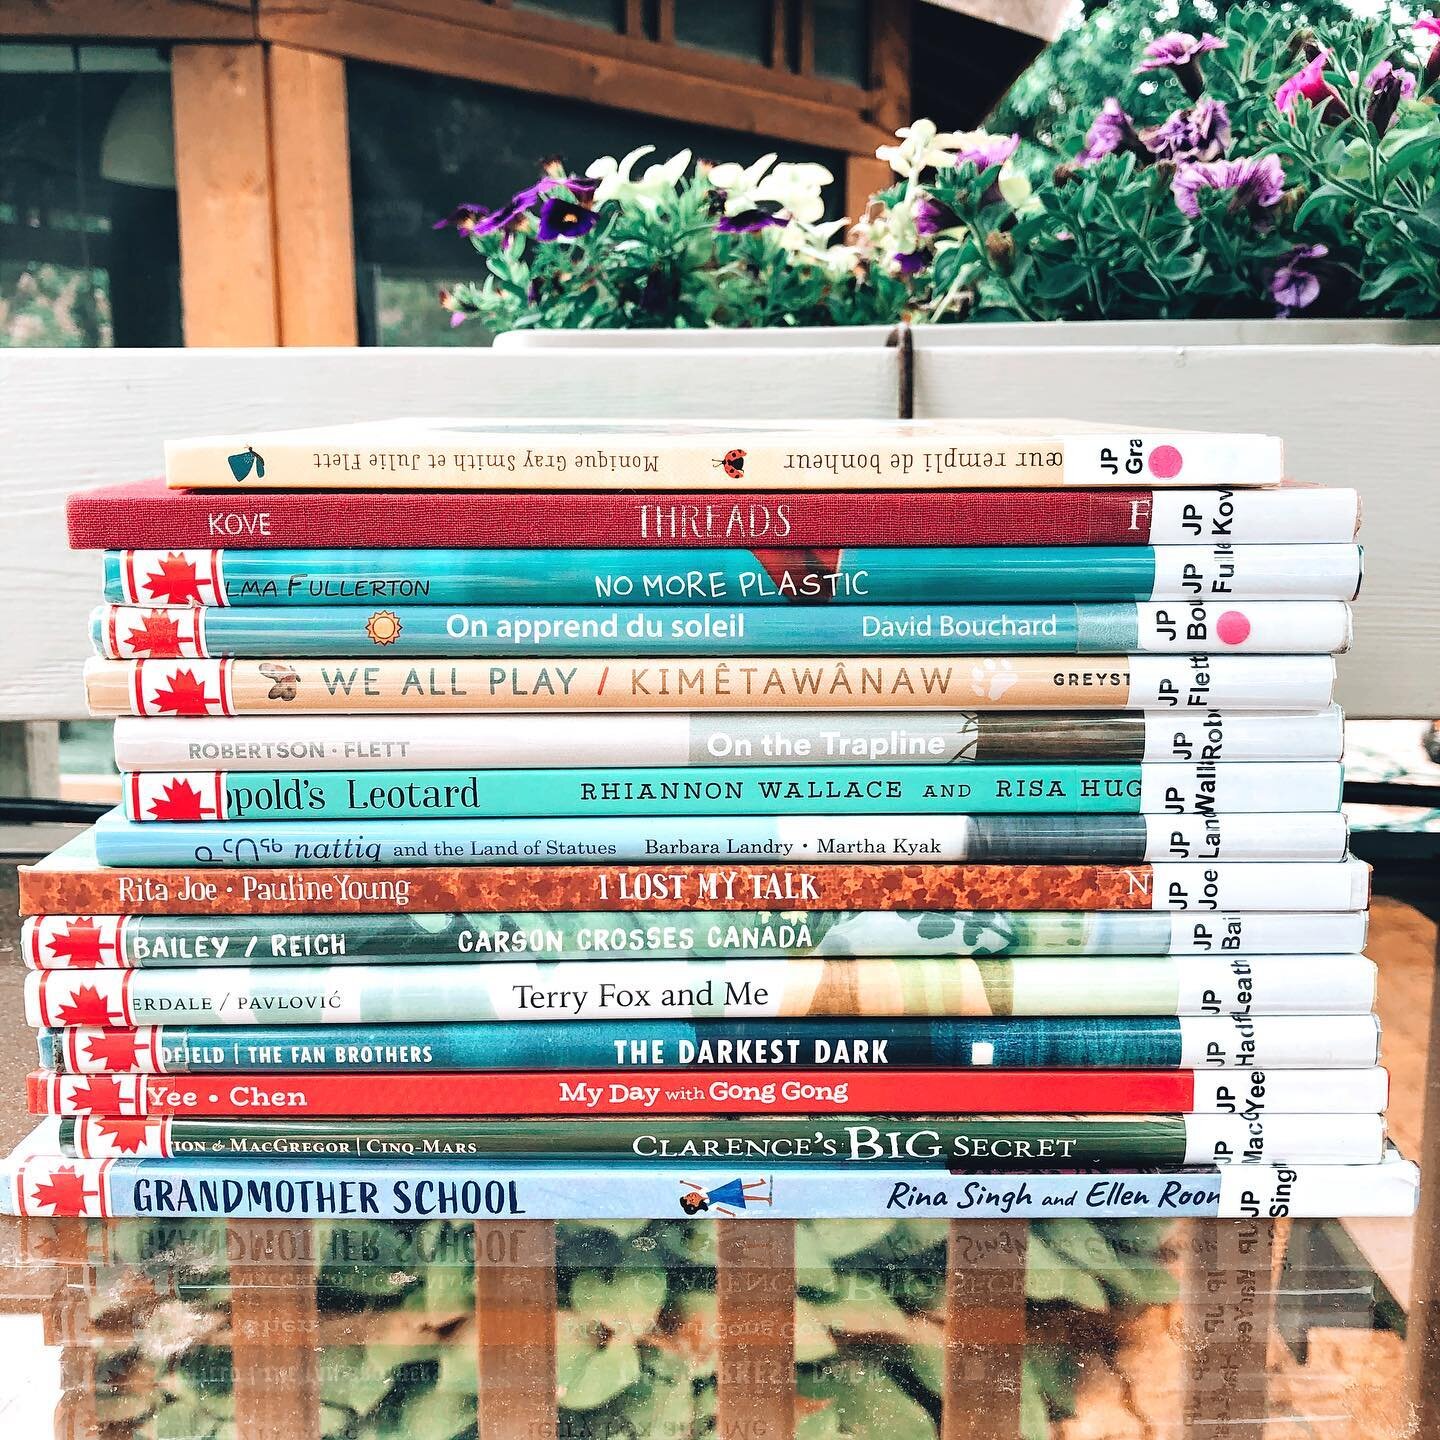 🇨🇦 Although Canada Day looked different for us this year, I still enjoy reading as many Canadian authors as I can during the month of July. Here&rsquo;s a stack that we got from the library recently. 

Who is your favourite Canadian children&rsquo;